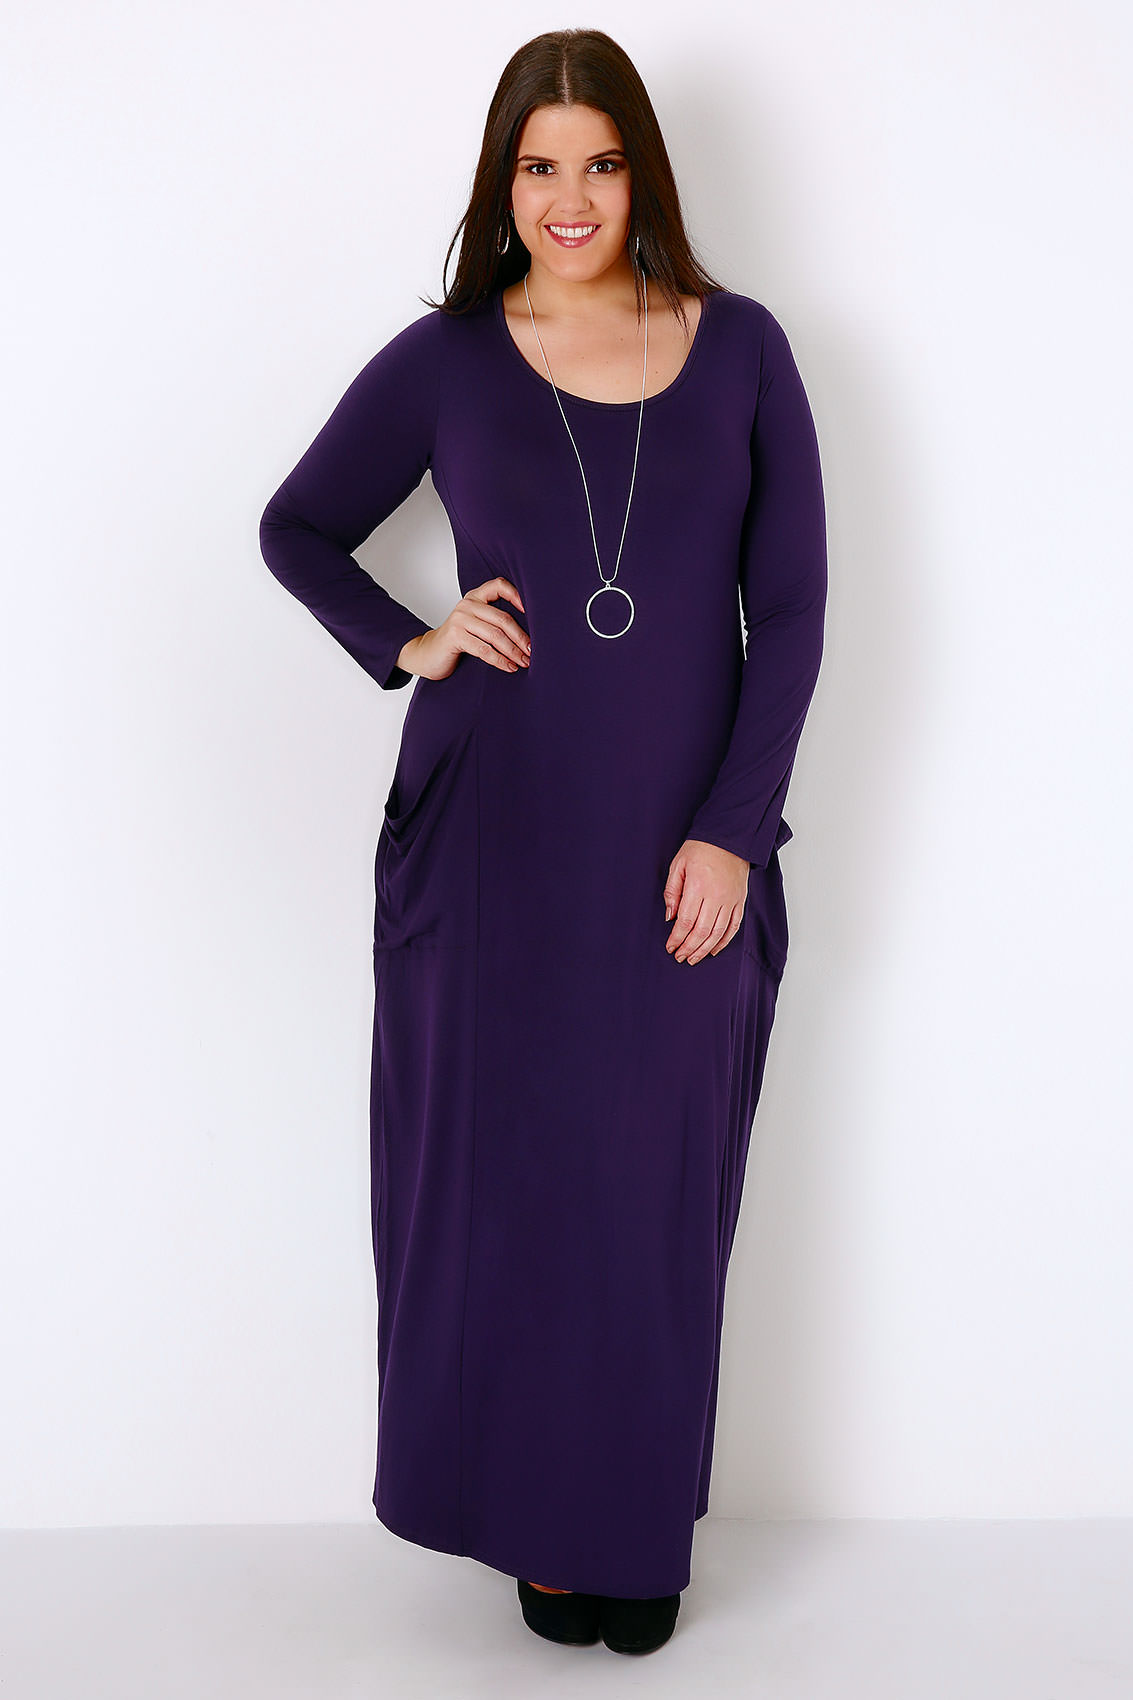 Purple Maxi Dress With Long Sleeves & Drop Pockets, Plus size 16 to 32